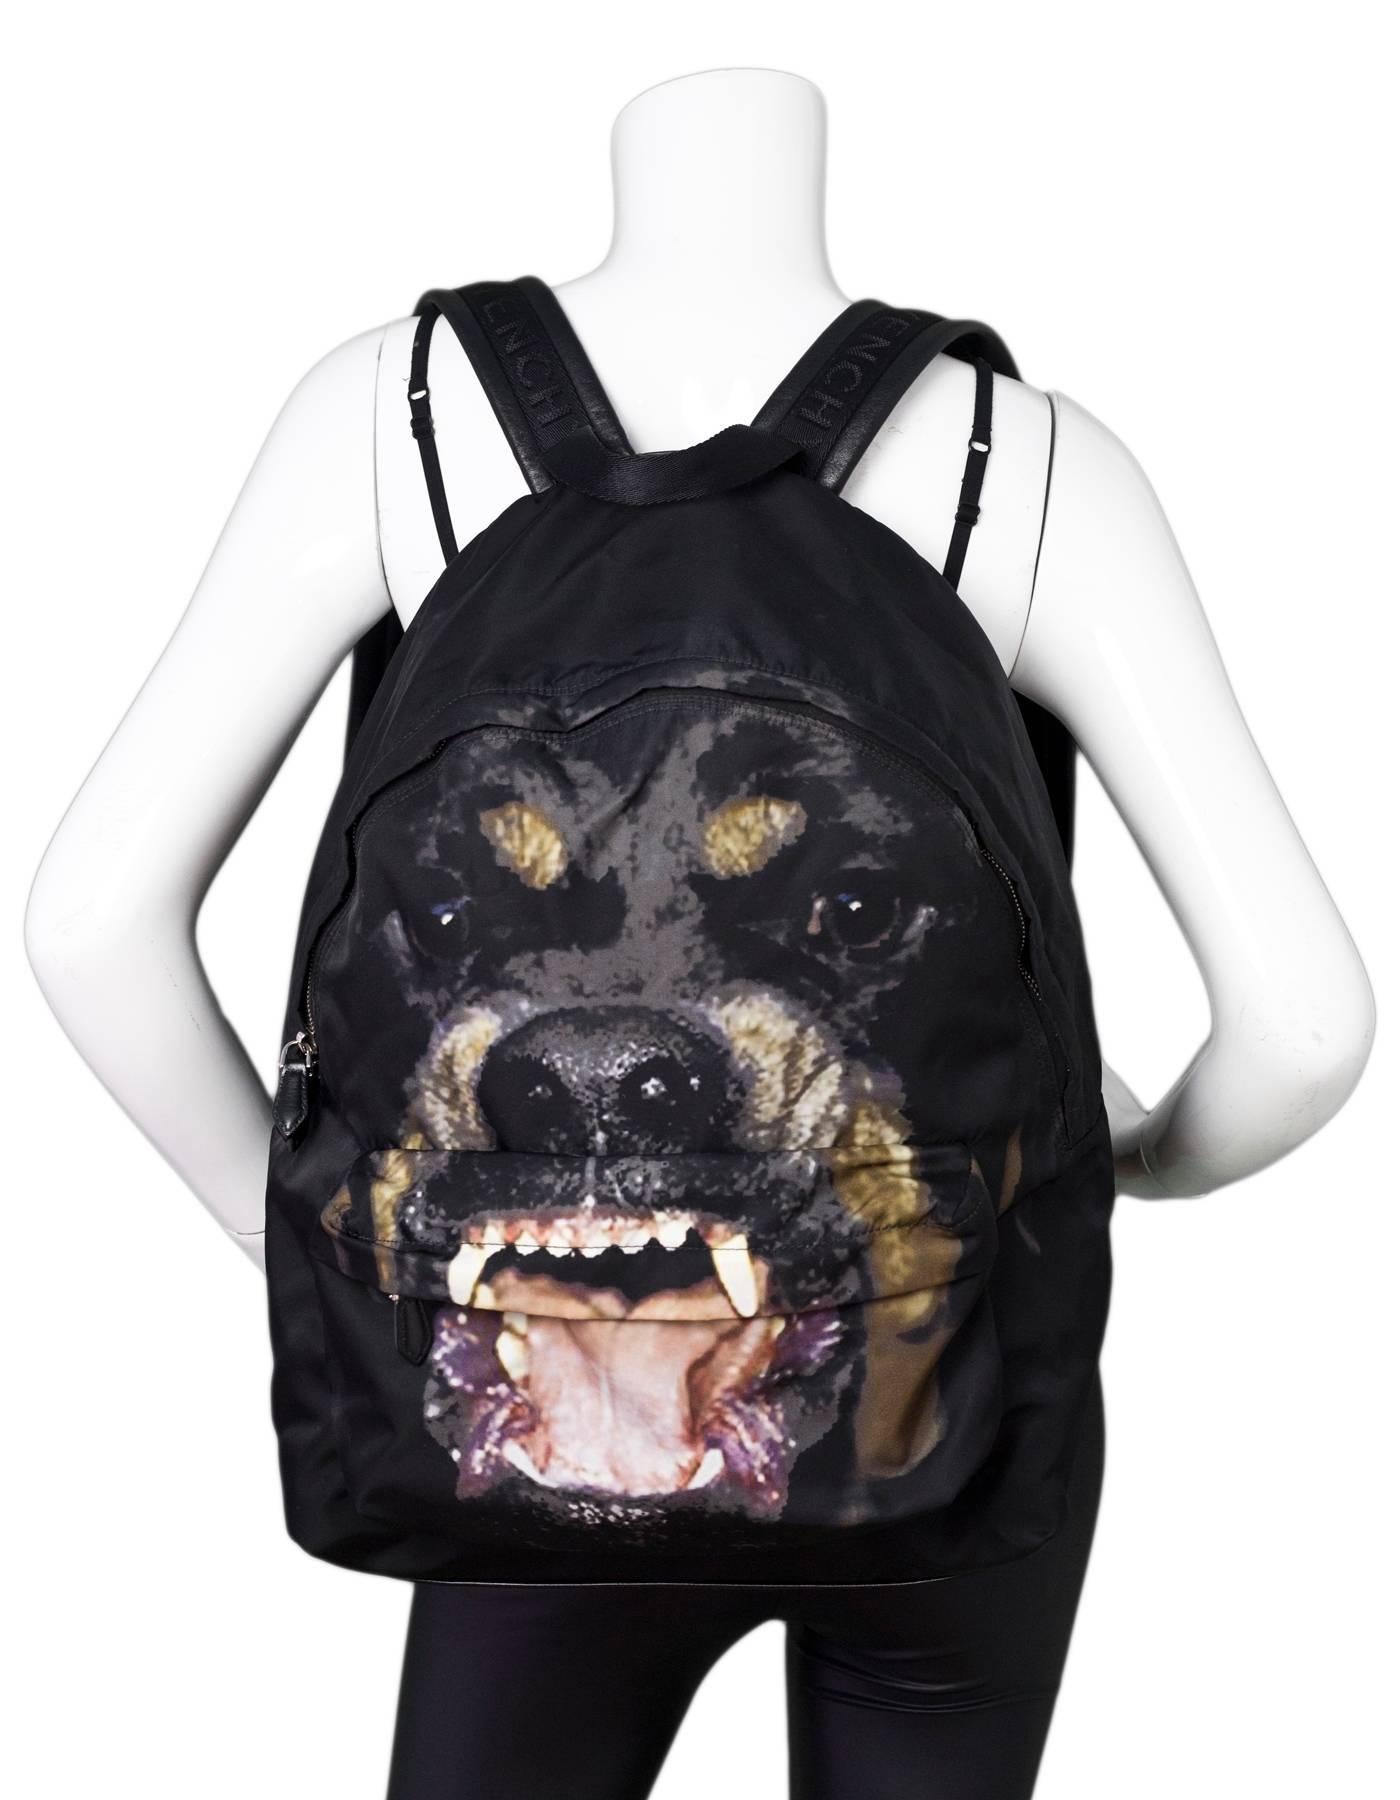 Givenchy Black Rottweiler Backpack

Made In: Romania
Color: Black
Hardware: Silvertone
Materials: Nylon, leather, canvas
Lining: Black textile
Closure/Opening: Double zip closure
Exterior Pockets: Front zip pocket
Interior Pockets: One zip